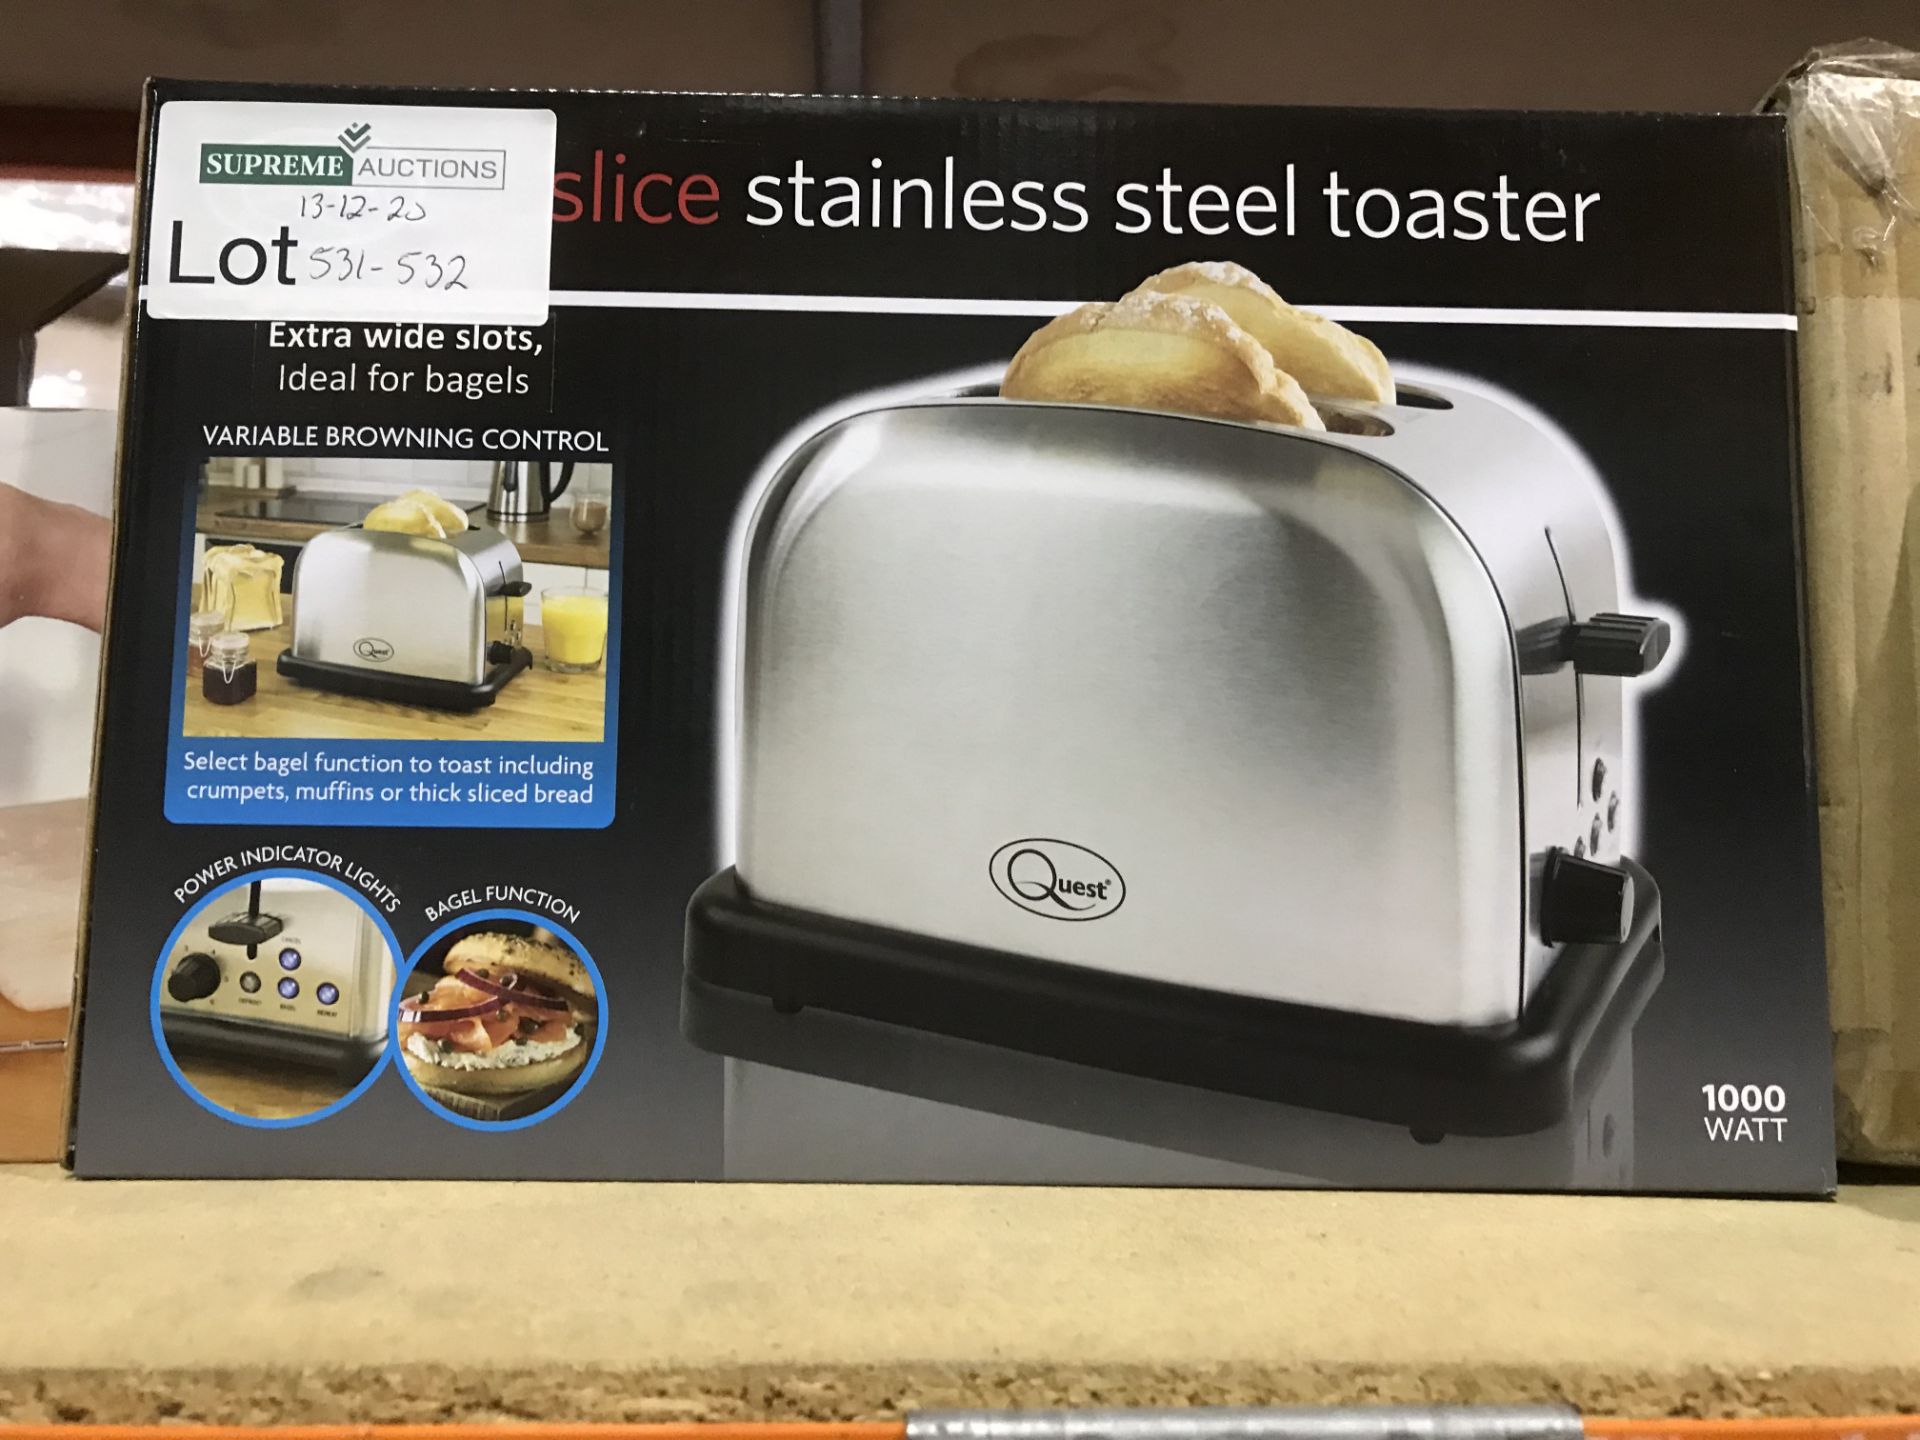 QUEST 2 SLICE STAINLESS STEEL TOASTER